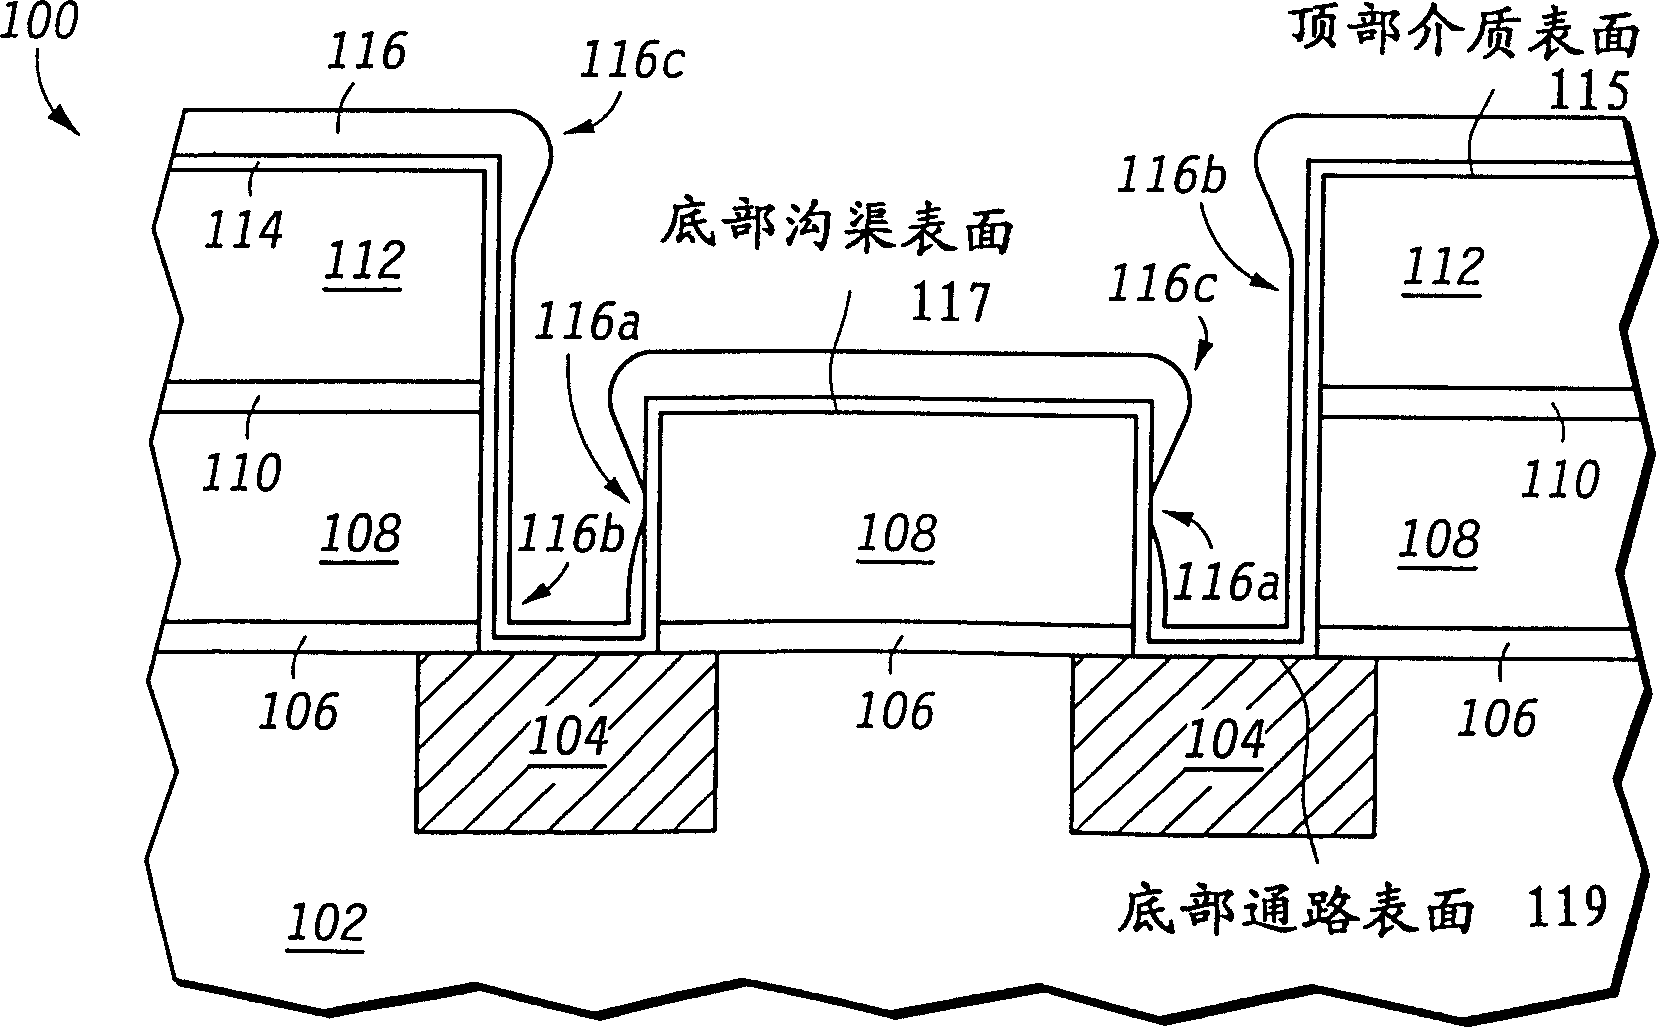 Method for forming copper layer on semiconductor chip